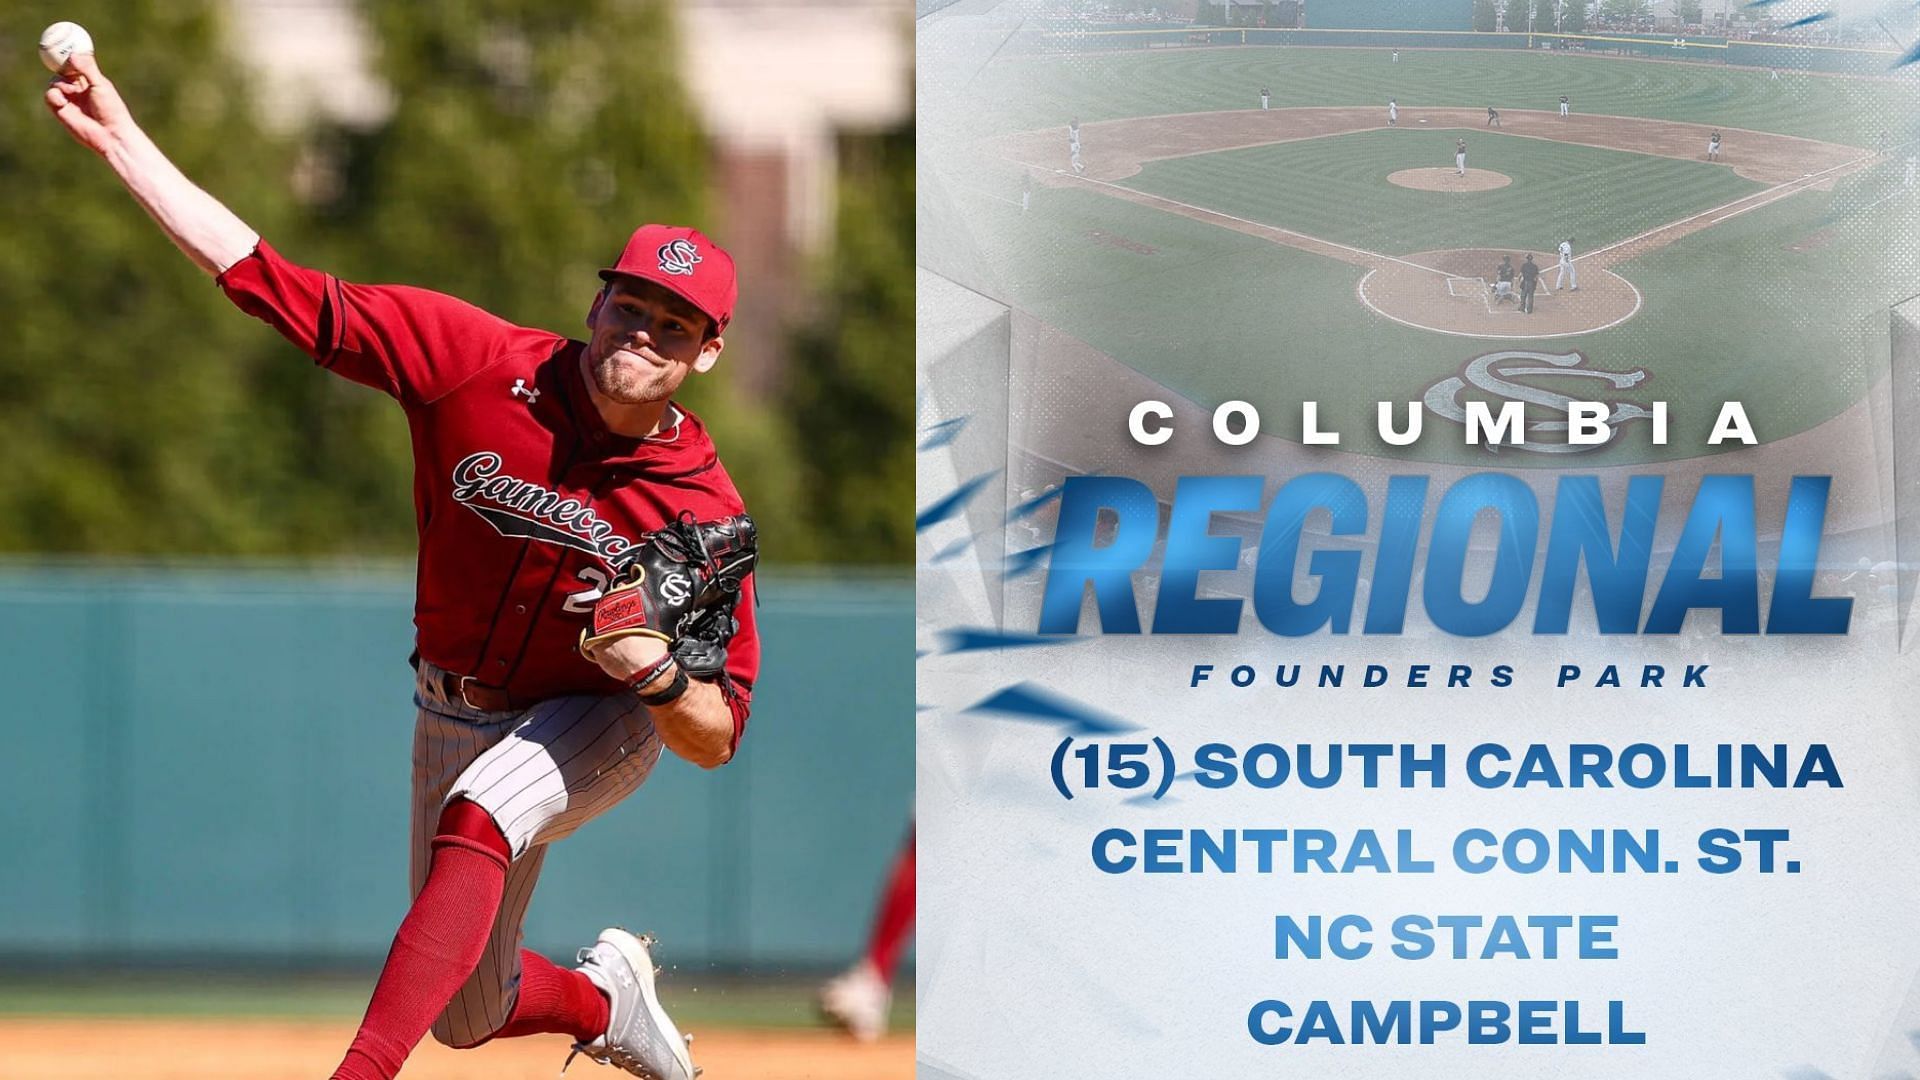 The Columbia Regional tournament is set to begin on Friday, June 2nd